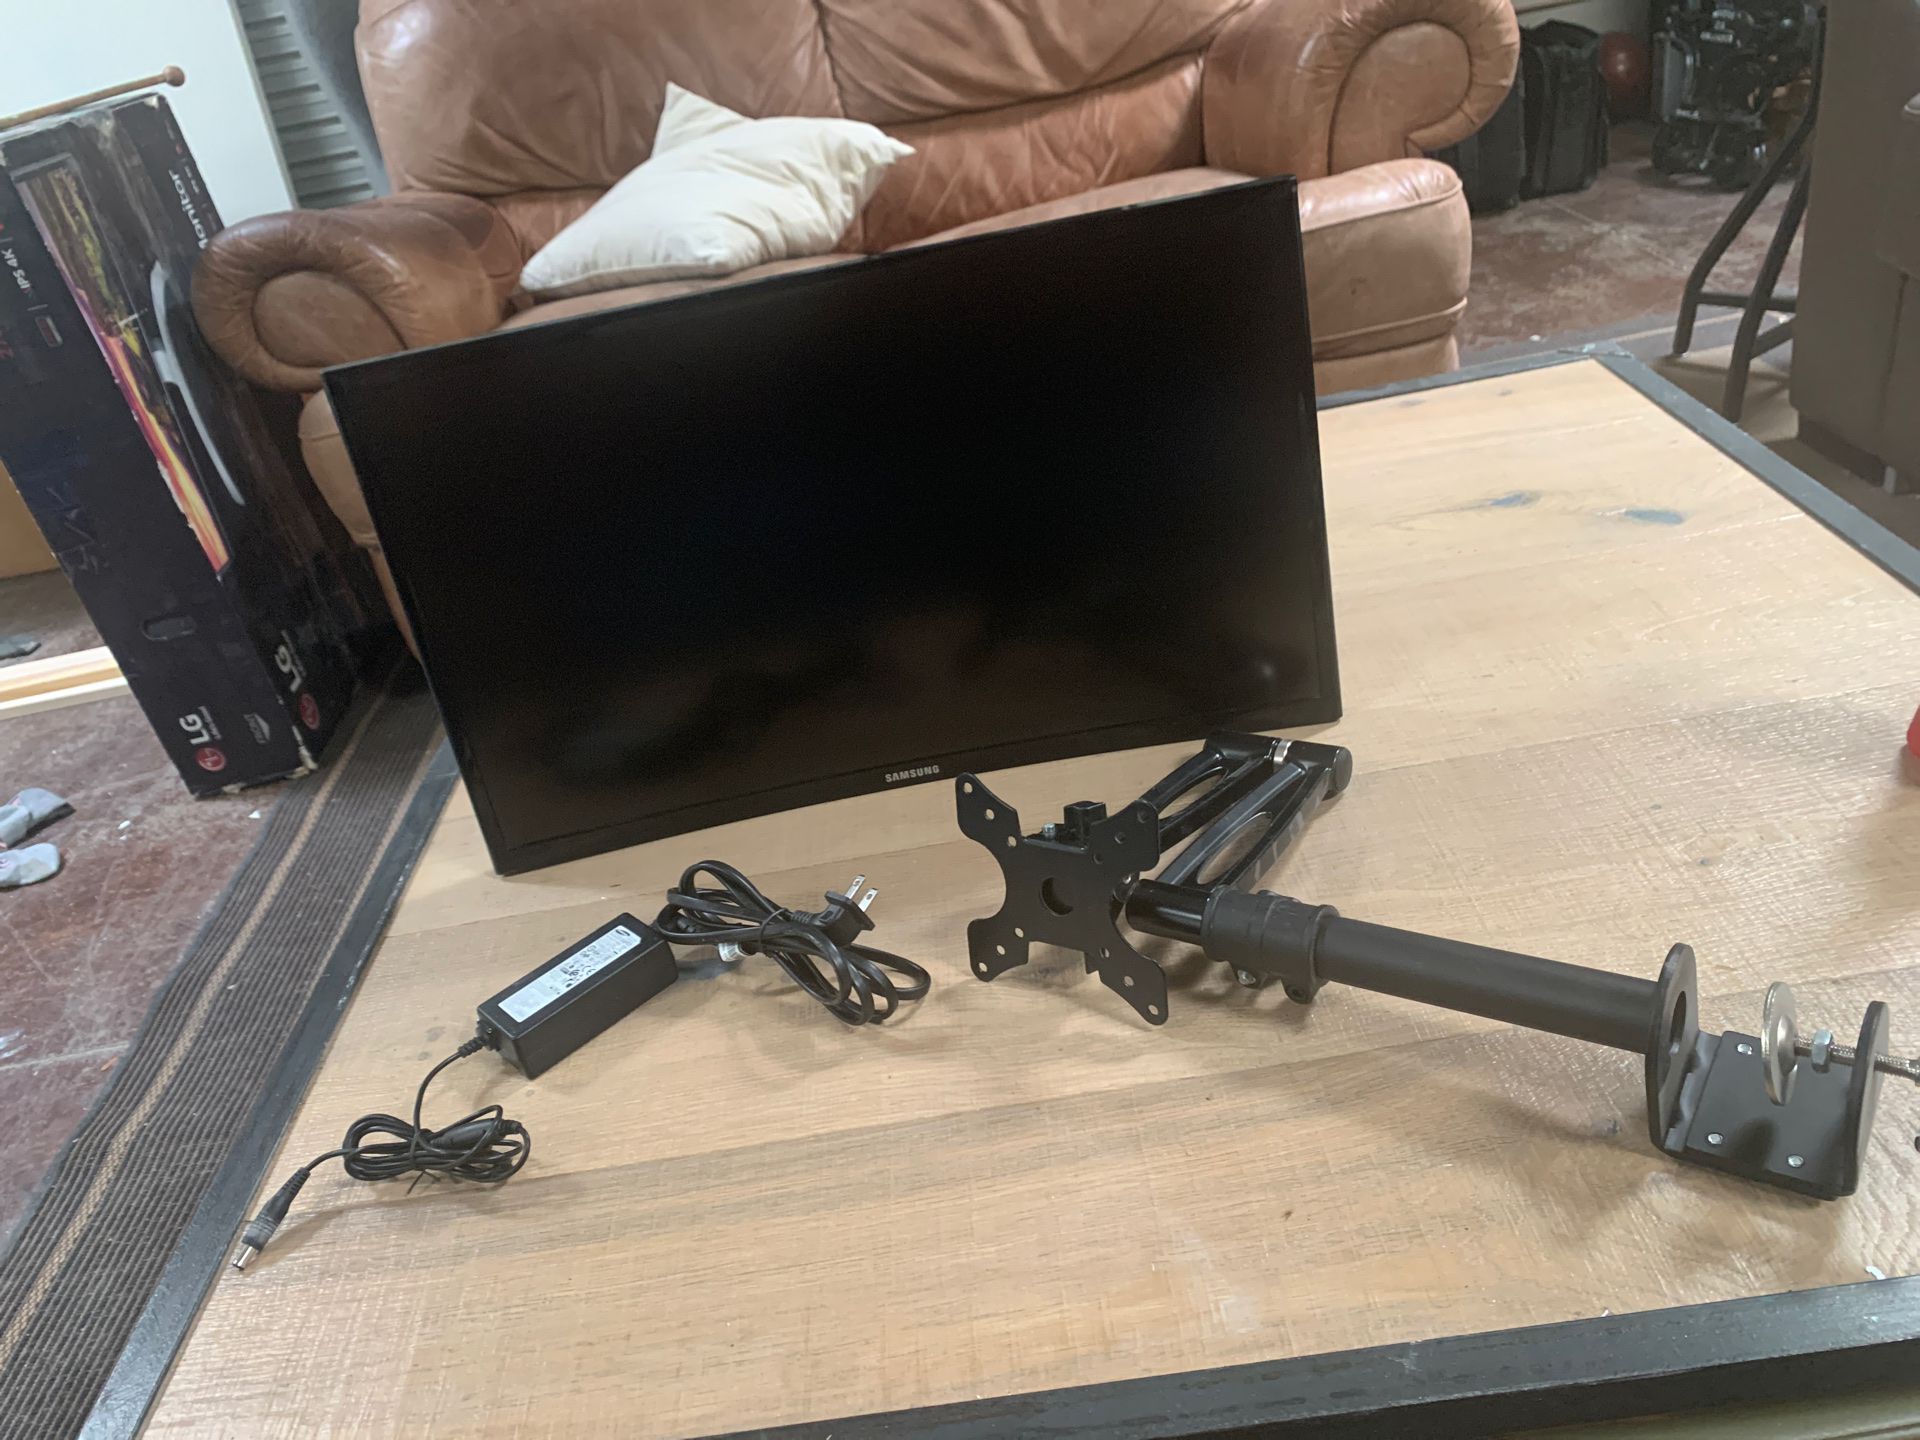 Samsung 24” curved monitor w/ desk stand